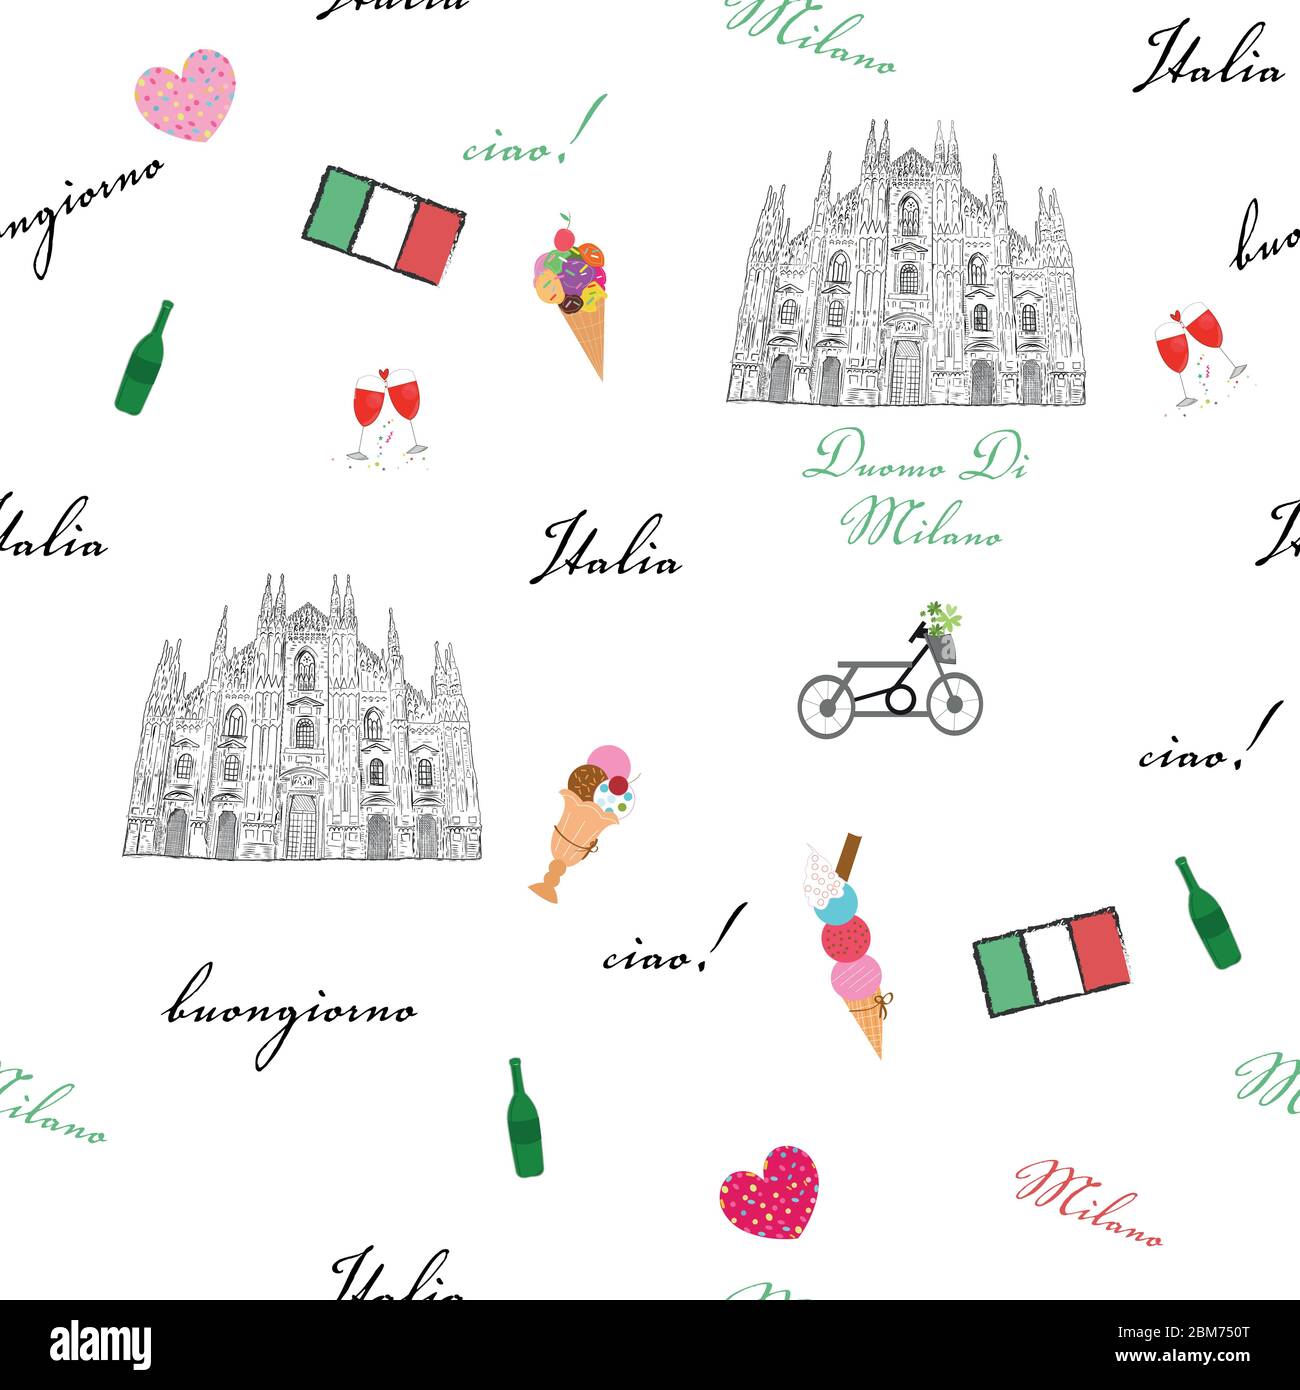 Milan, Italy seamless pattern with hand drawn sketch elements Duomo cathedral, flag, traditional food textile pattern Stock Vector